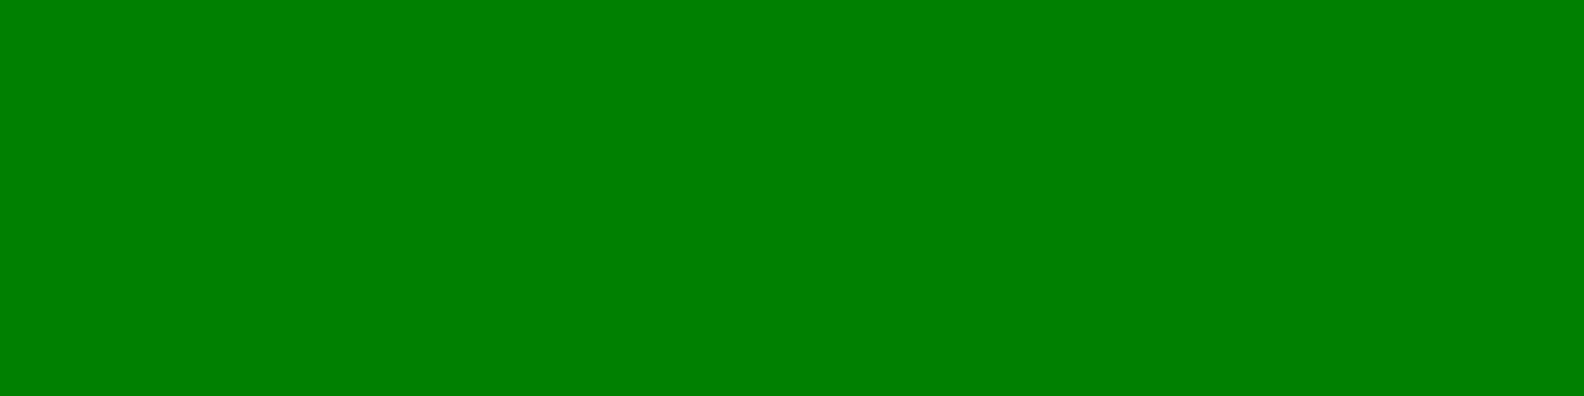 1584x396 Office Green Solid Color Background